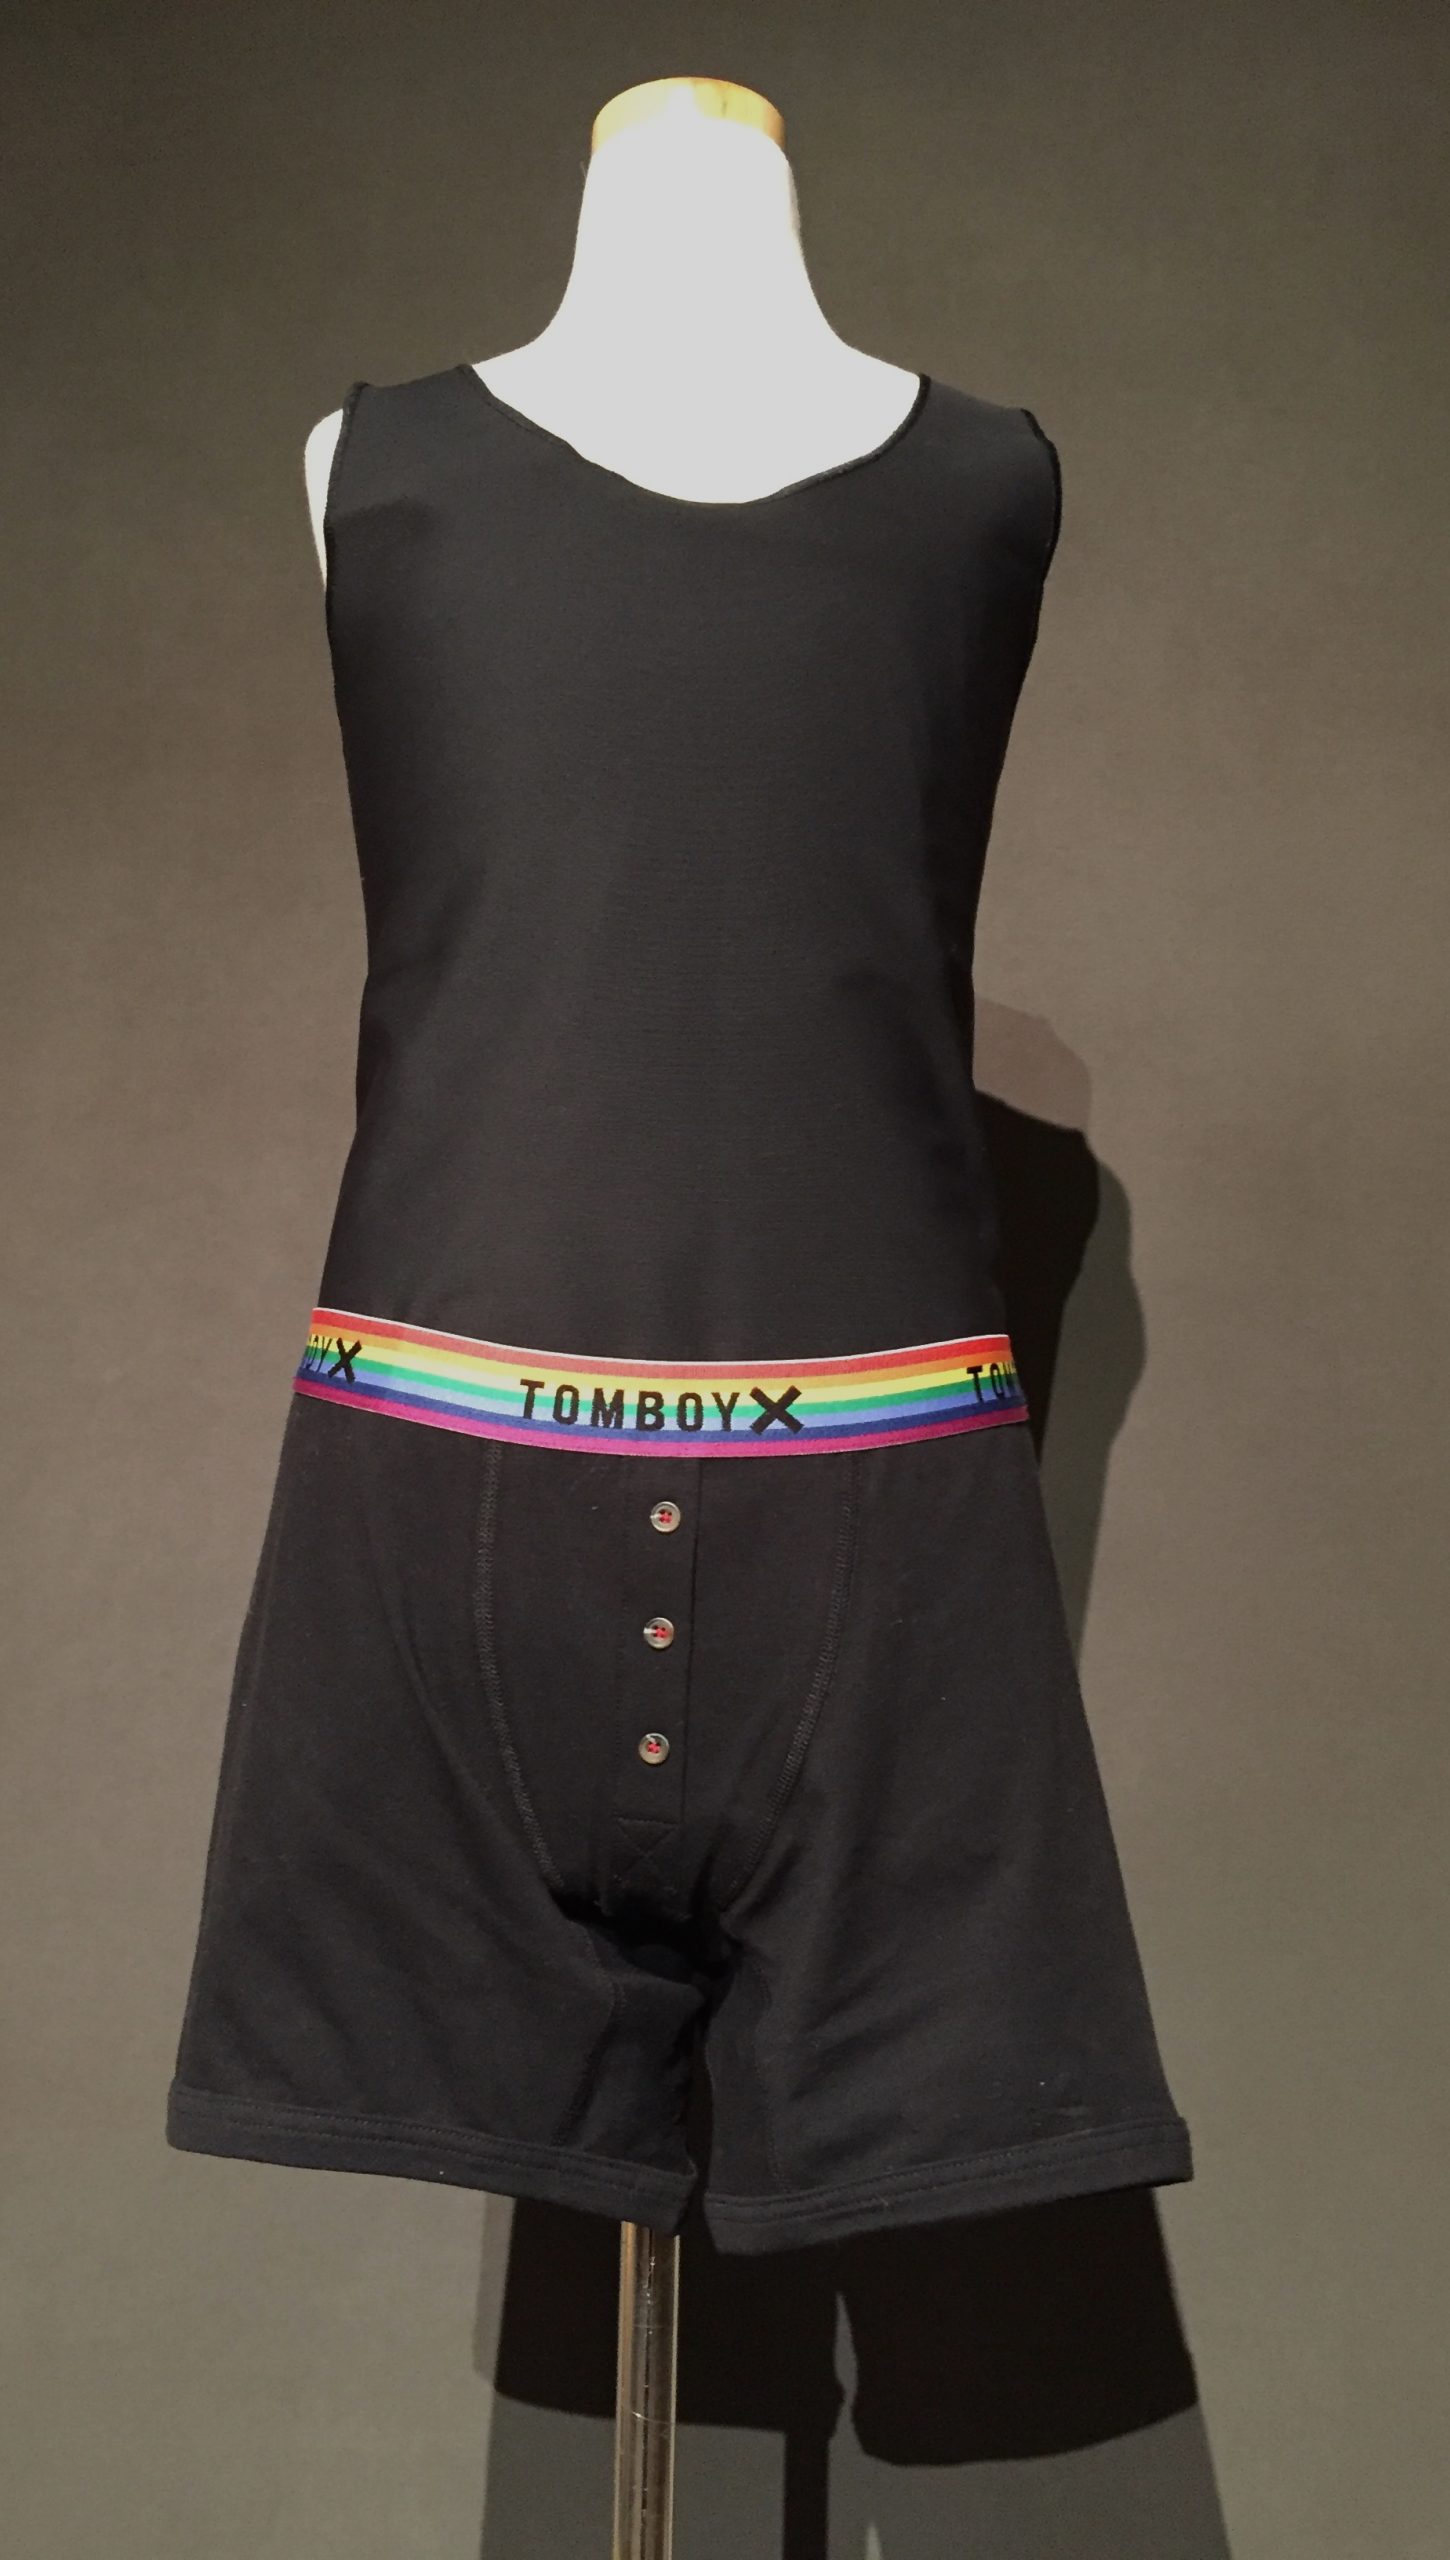 Black binder and black boxer briefs with rainbow waistband reading "TomboyX"